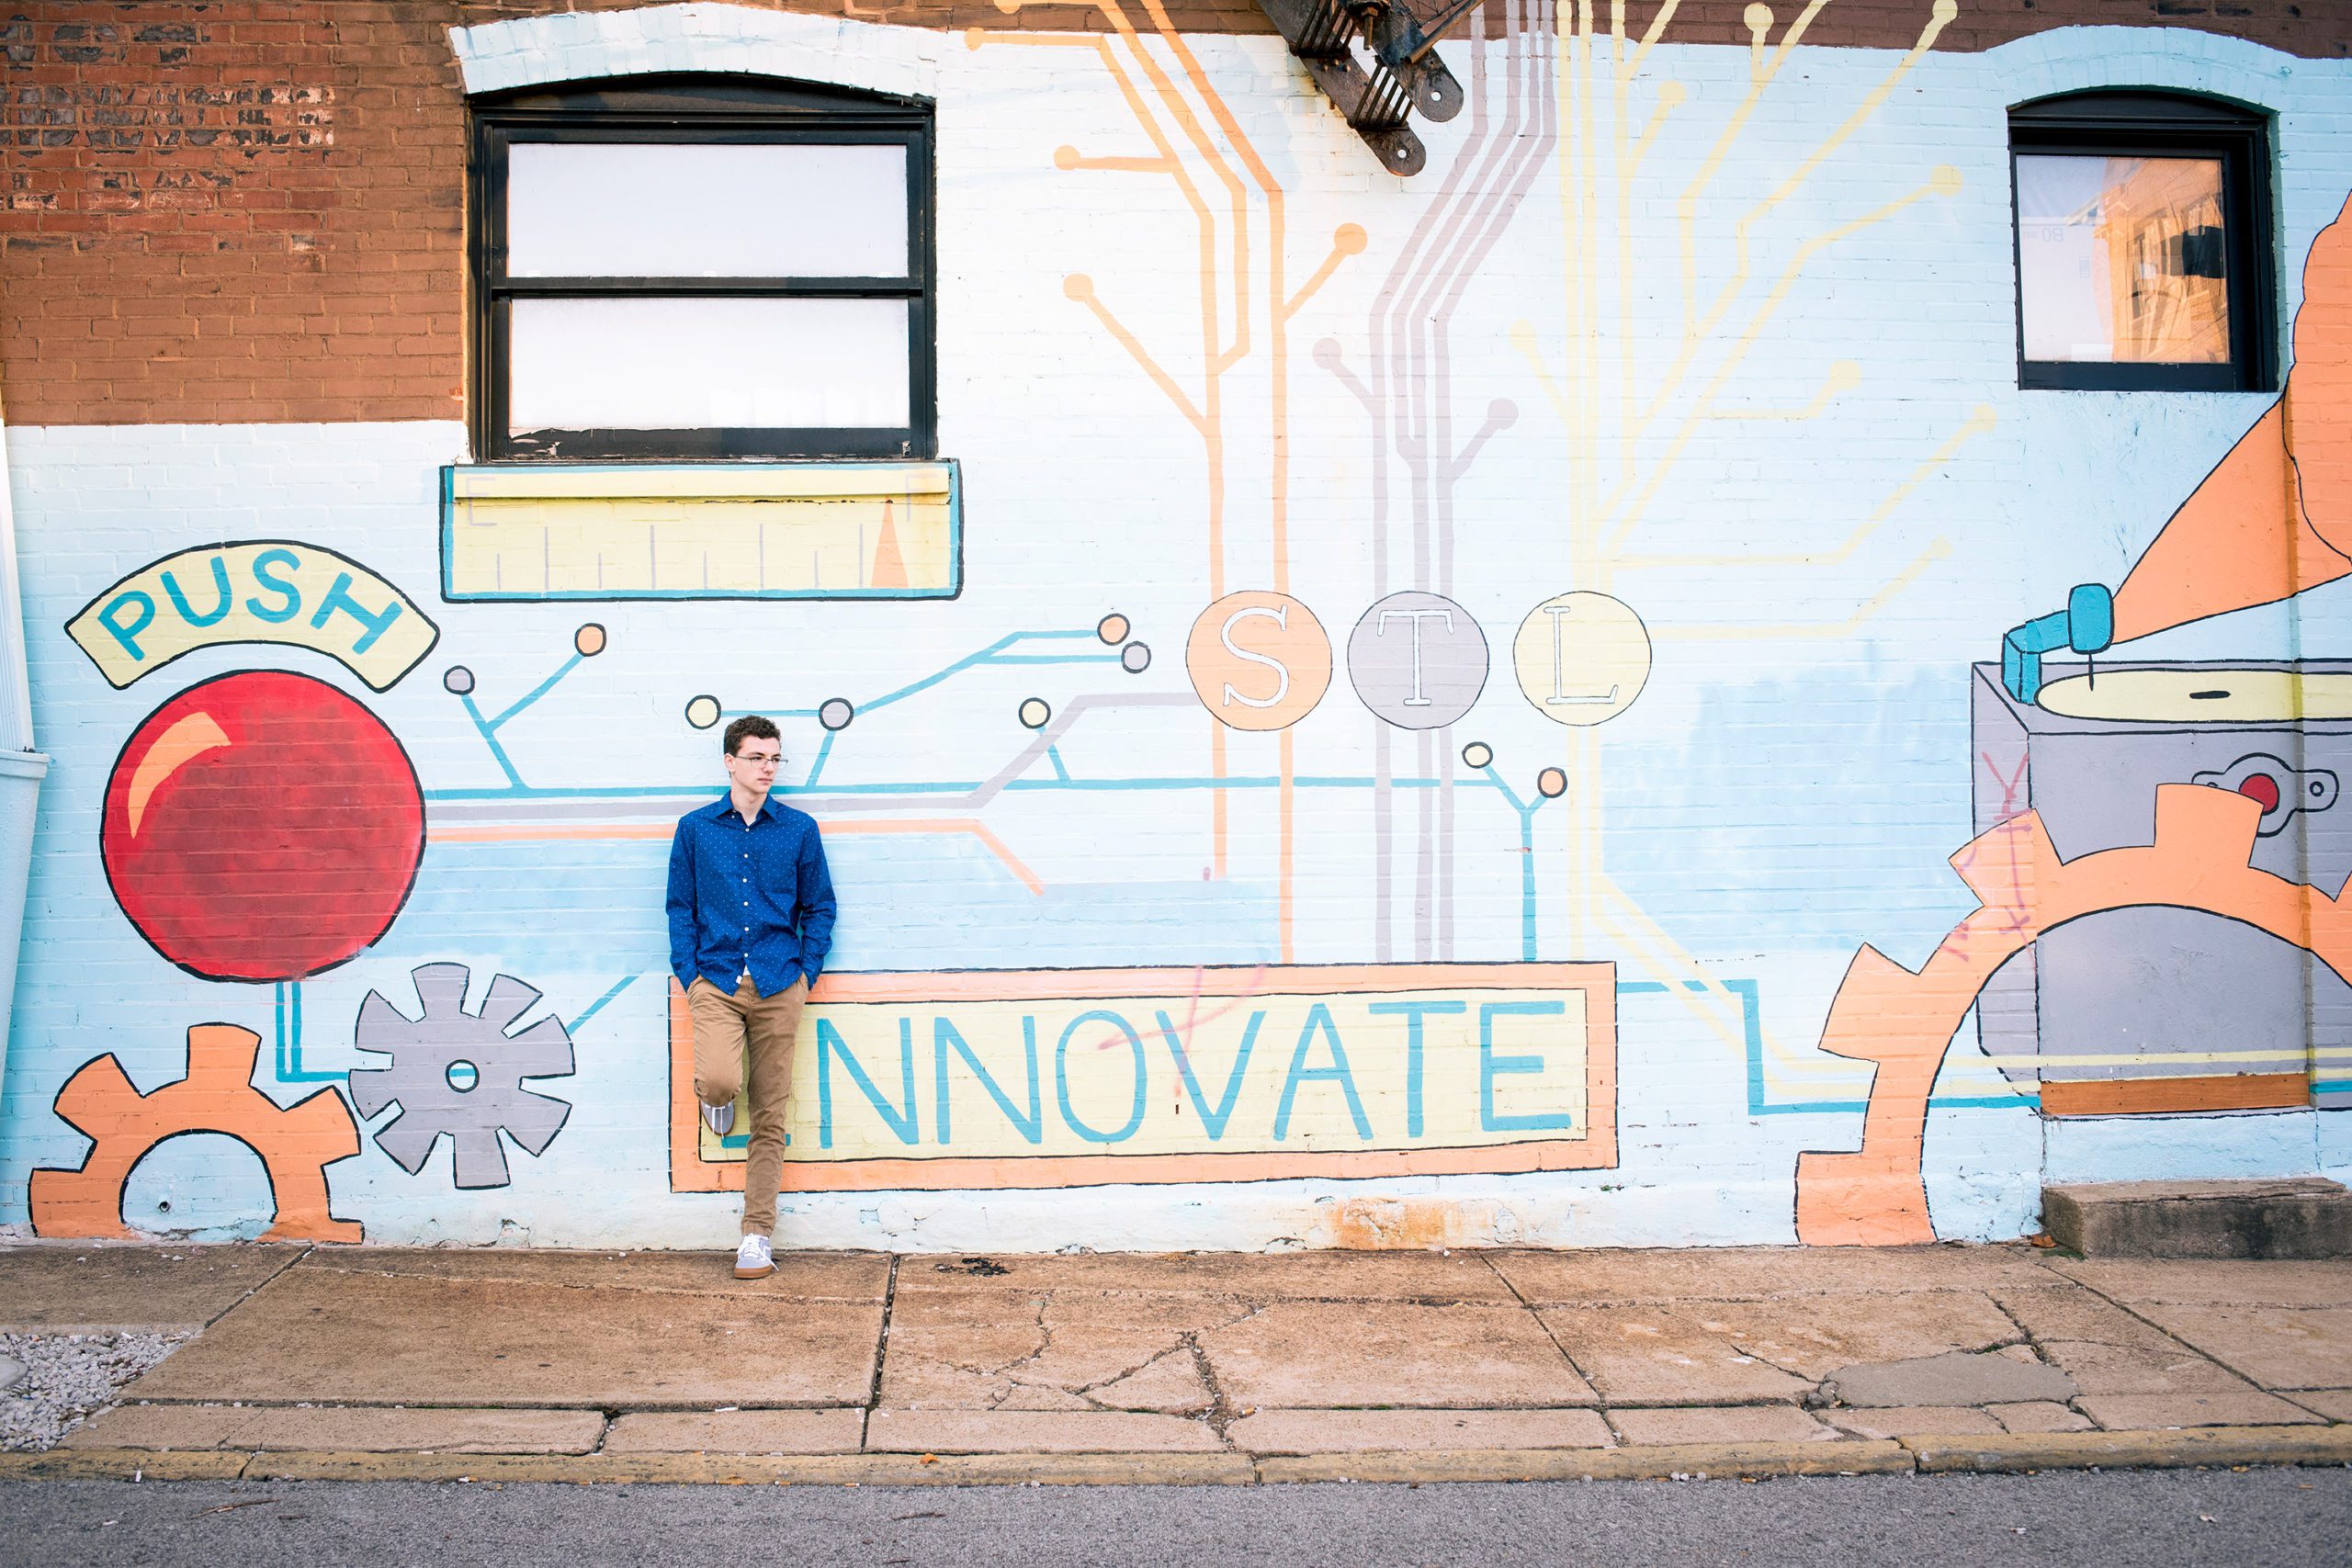 Senior Boy leaning against a wall mural that says "Innovate."